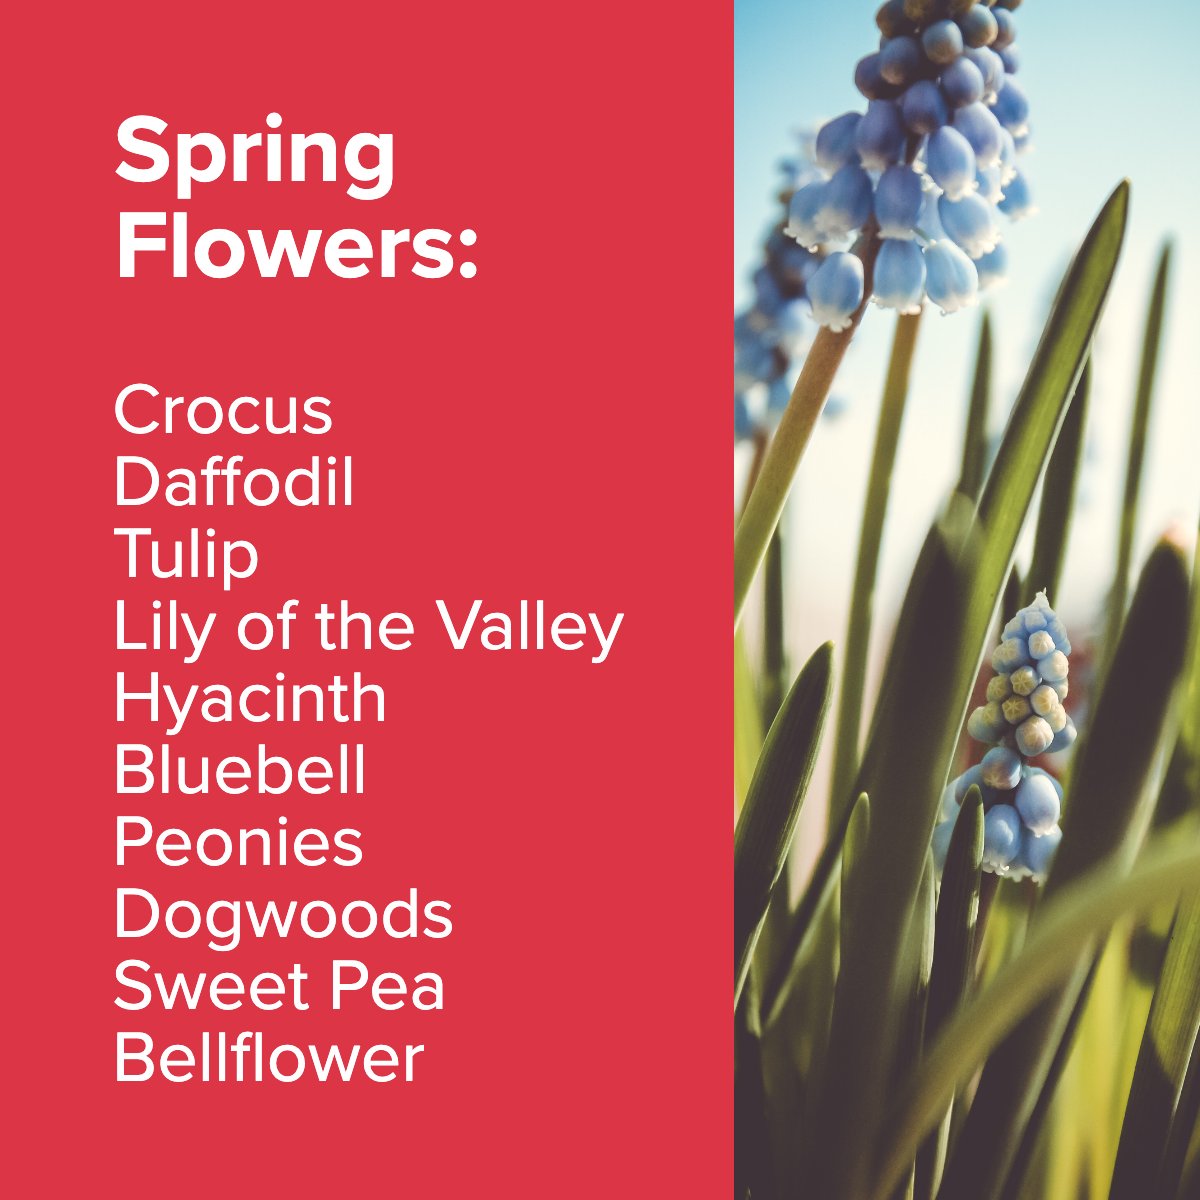 When spring arrives, why not welcome it with a garden full of blossoms to chase the winter blues away? 🌼🌺

#springflowers🌸     #flowersspringtime     #lovespringflowers     #springflowersblooming
#swfl #oleglisitsyn #oleglis #sarasota #Florida #wearemvp